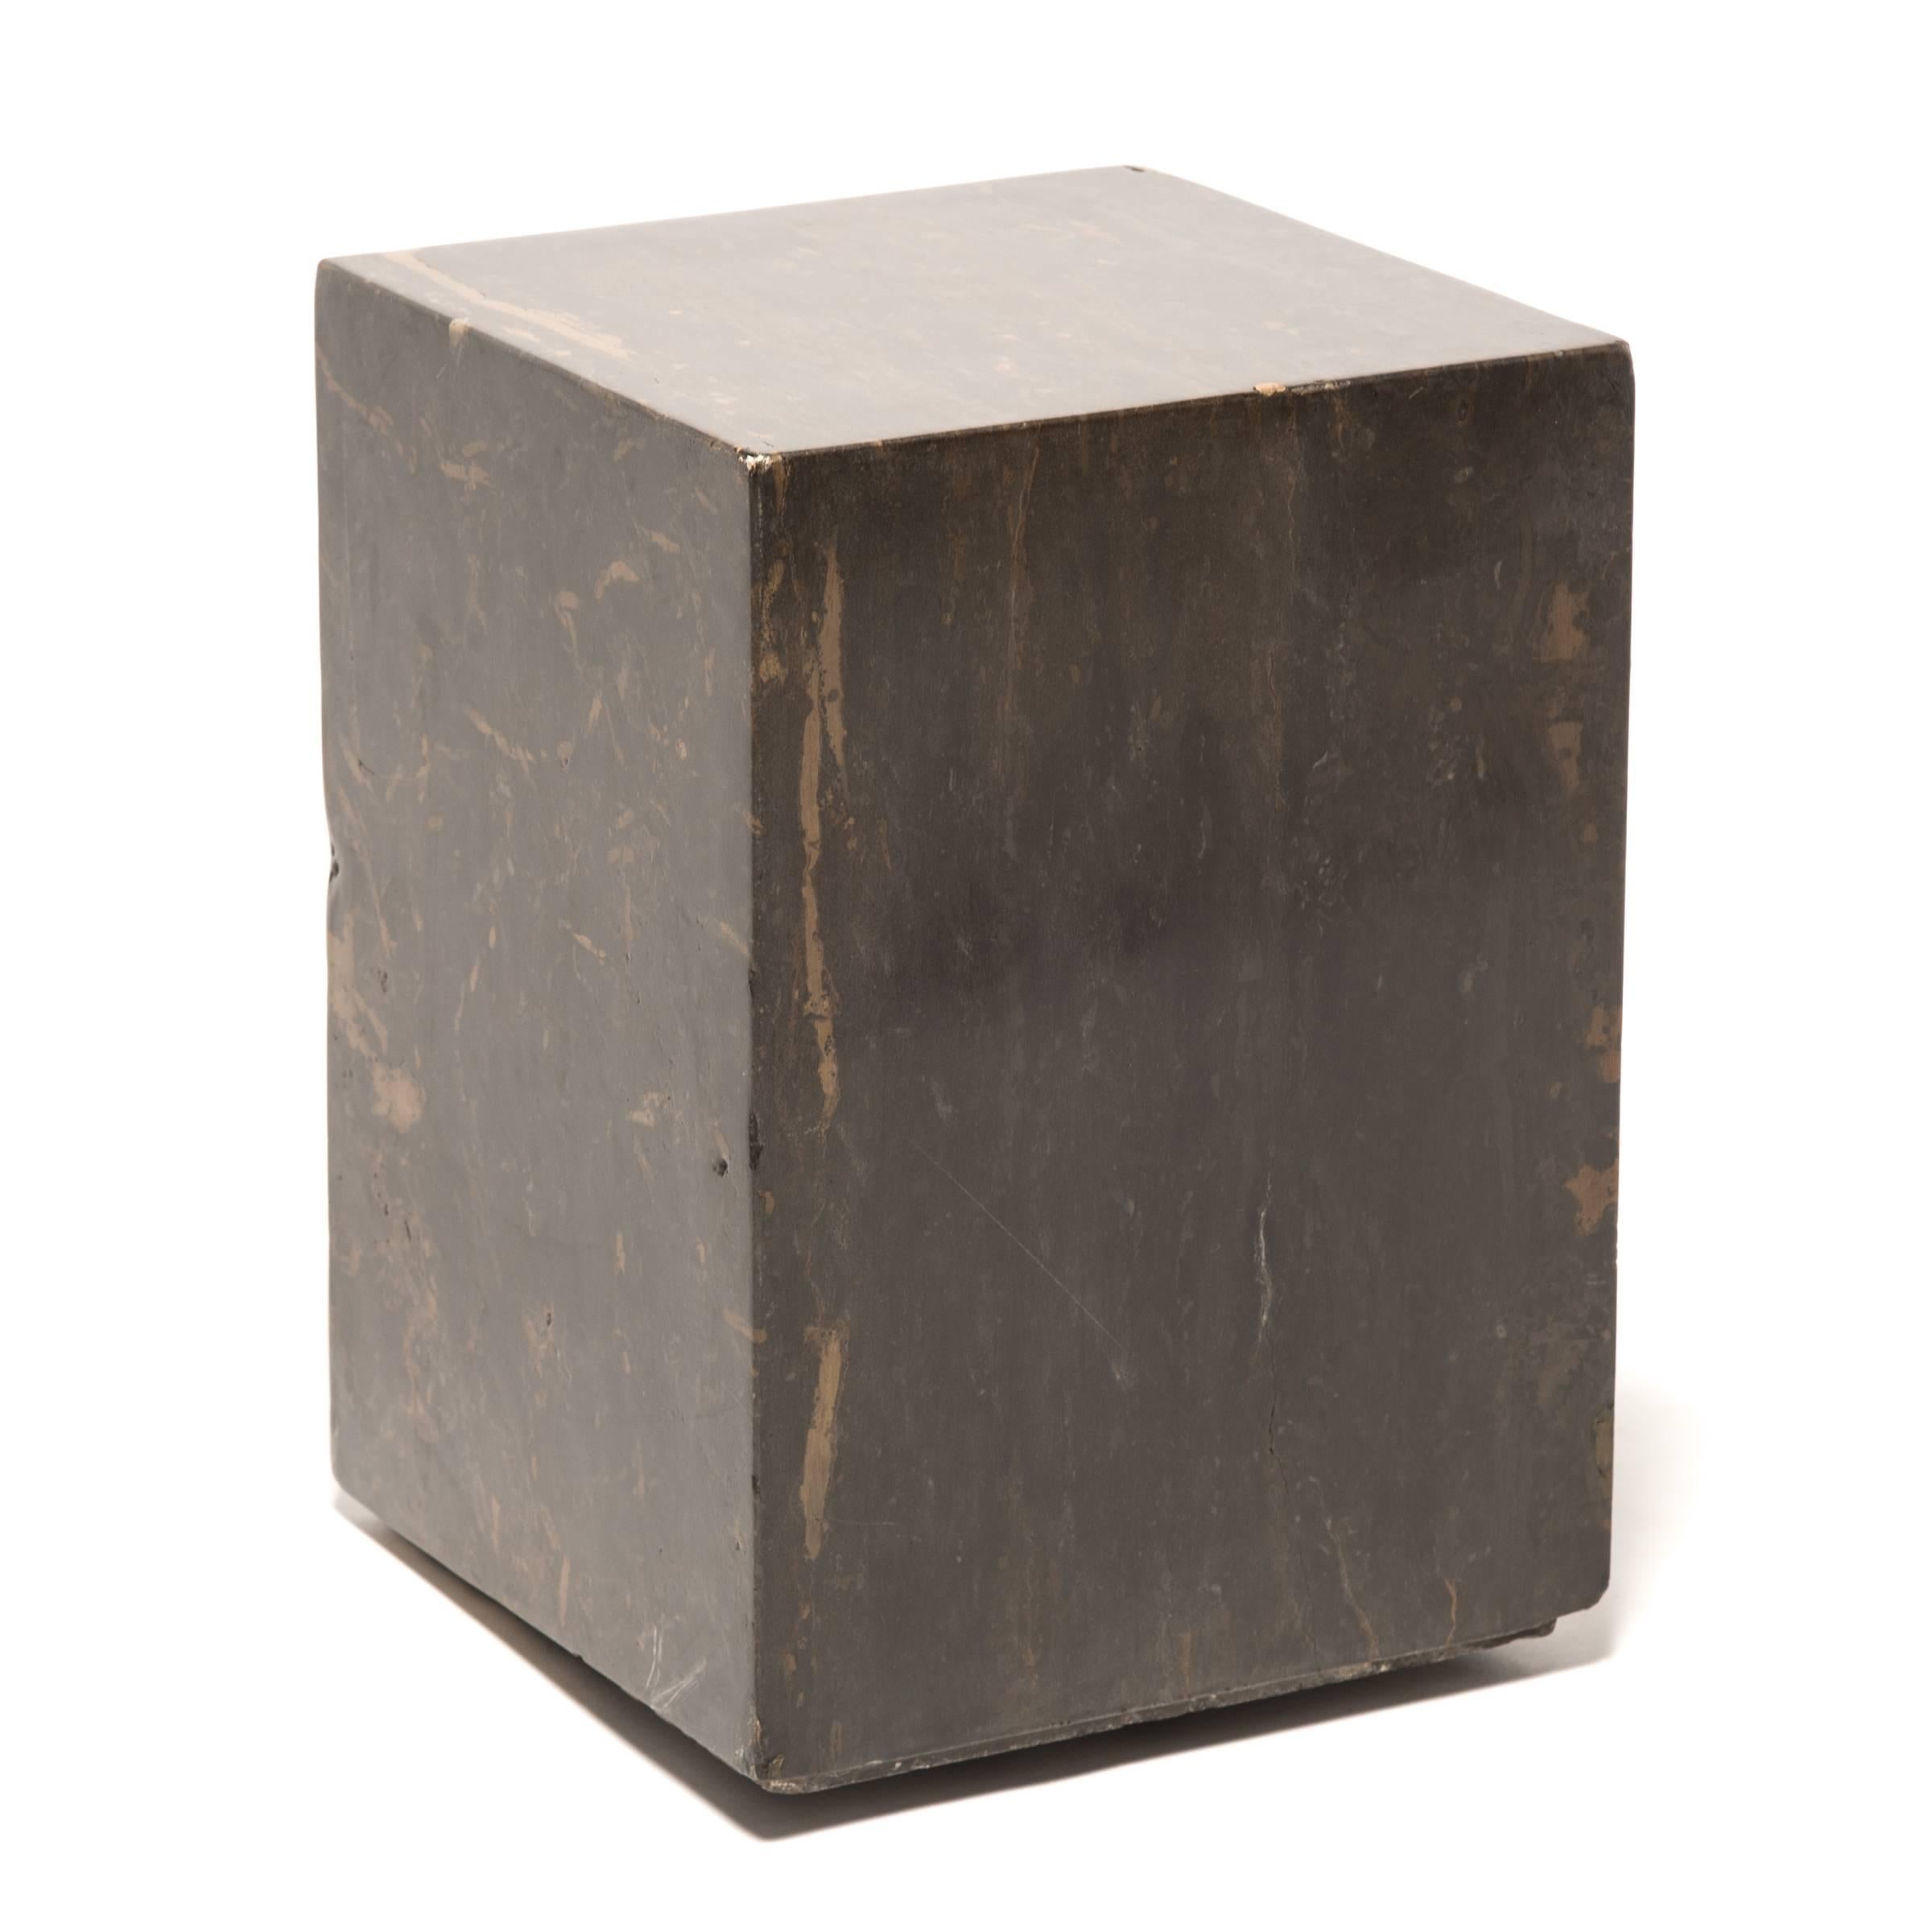 The design of these contemporary Doon tables makes the solid marble appear to float off the ground. Hand-carved perfectly into a marble block, the base has a graceful reveal, giving the stone a modern lightness. The table's rich bronze color is